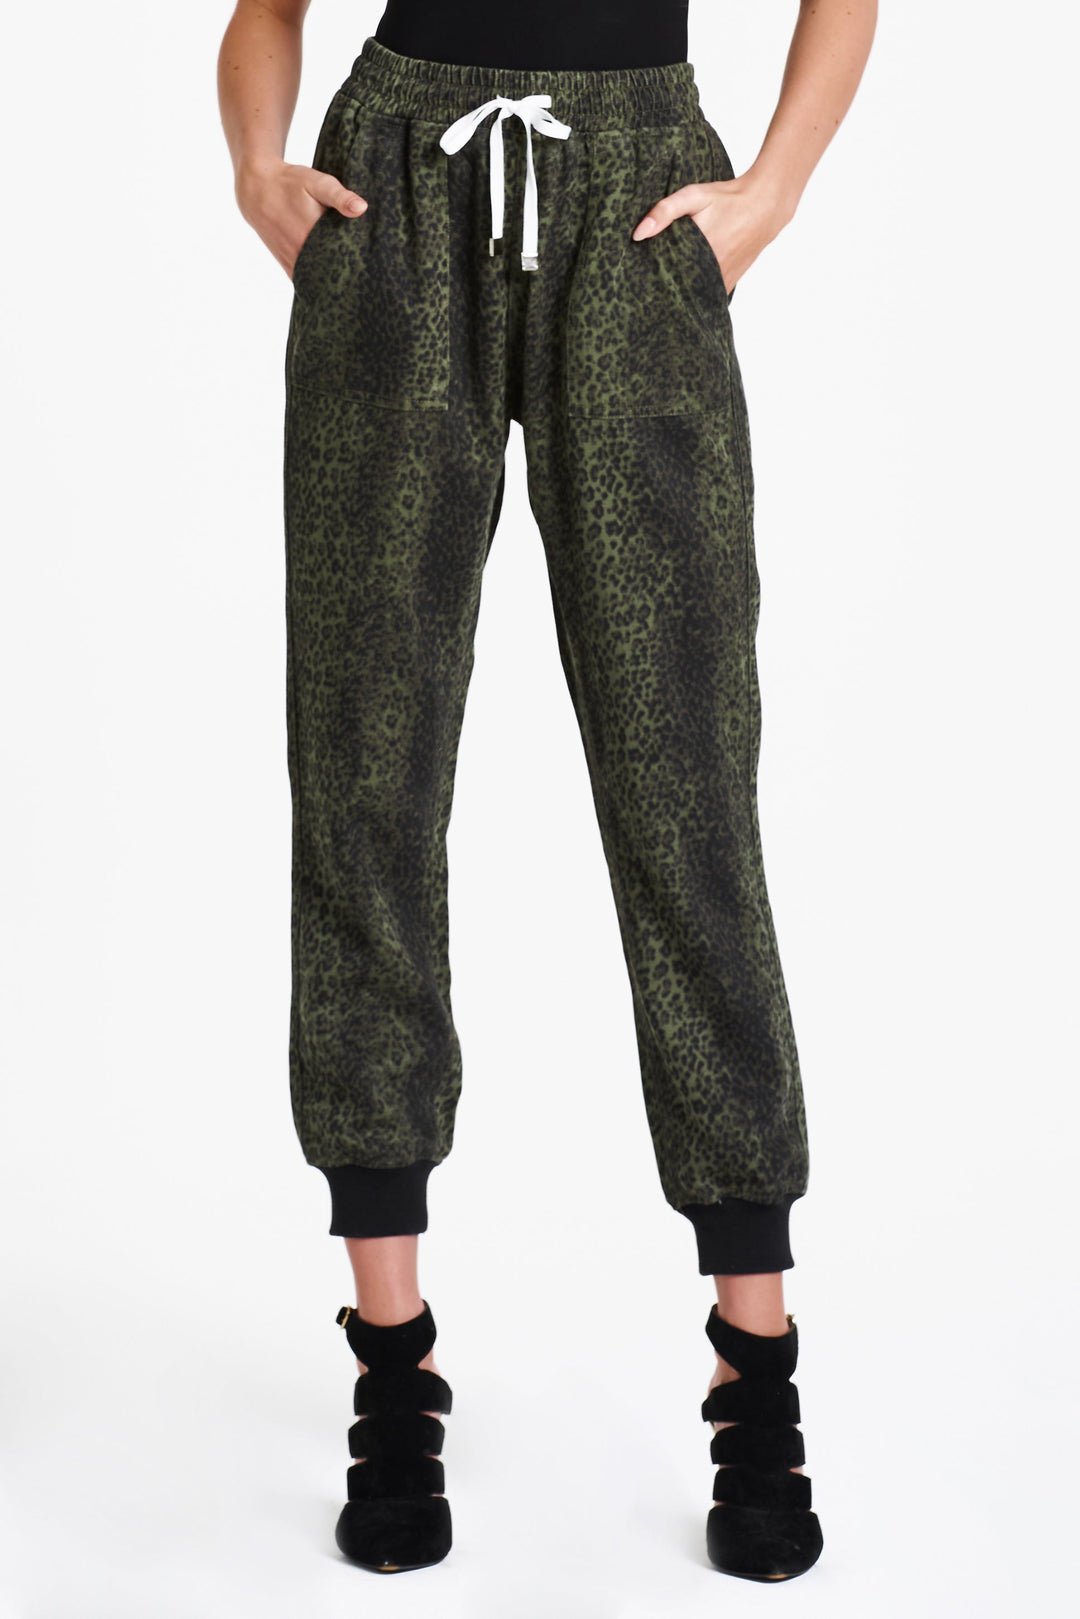 JACEY SUPER HIGH RISE CROPPED JOGGER PANTS CHARLESTON GREEN – DEAR